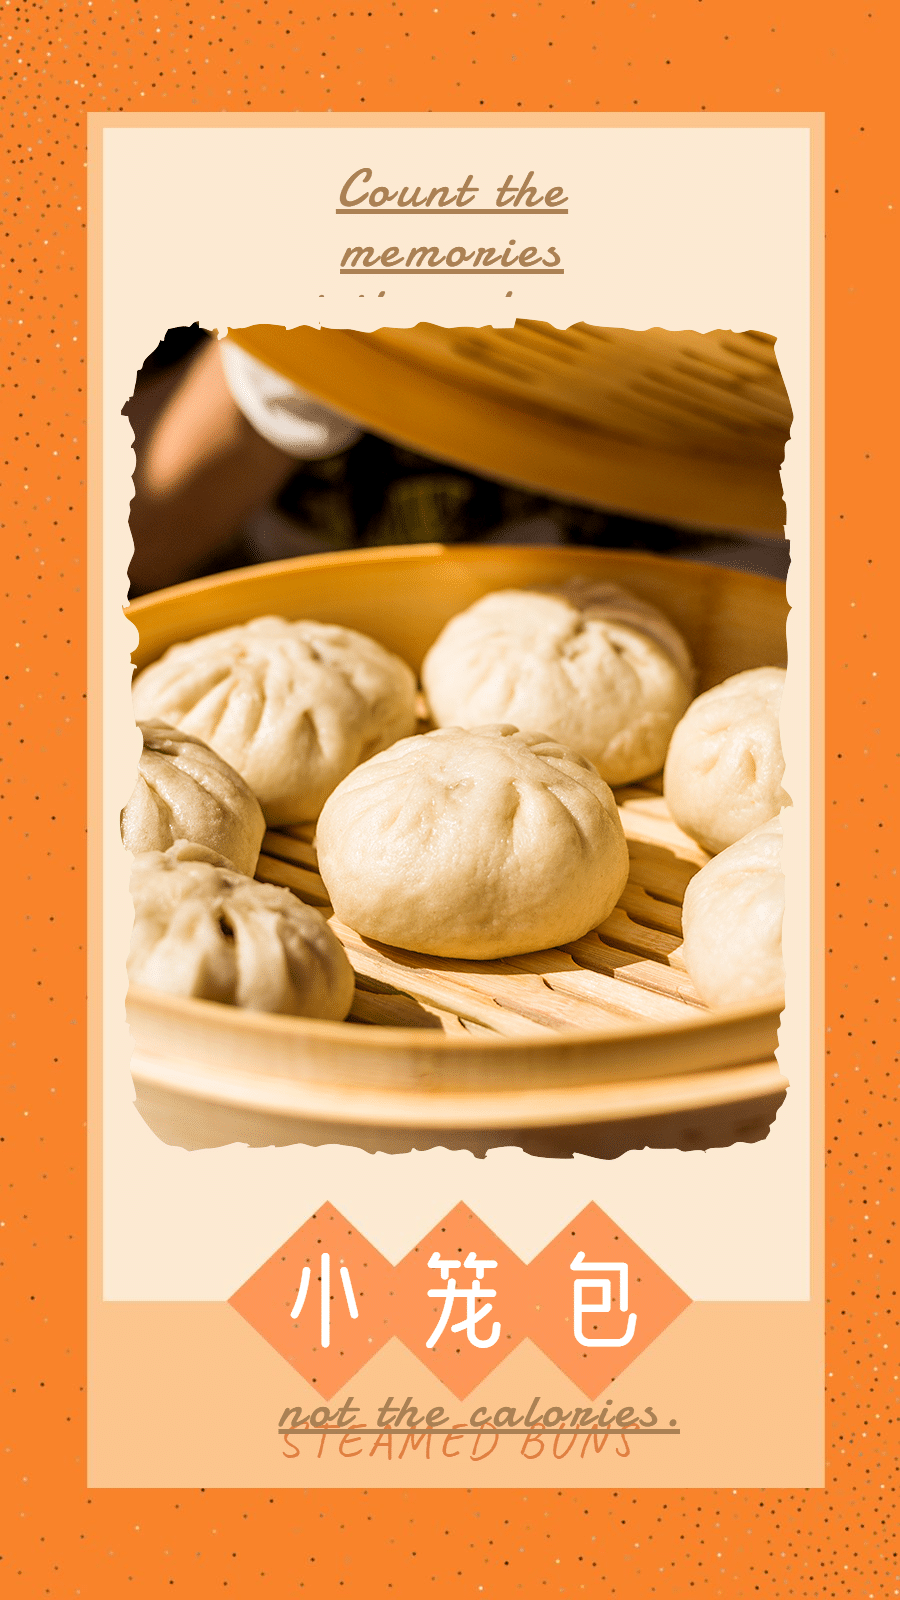 Chinese Delicious Food Record Steamed Dumplings Simple Festive Style Instagram Story